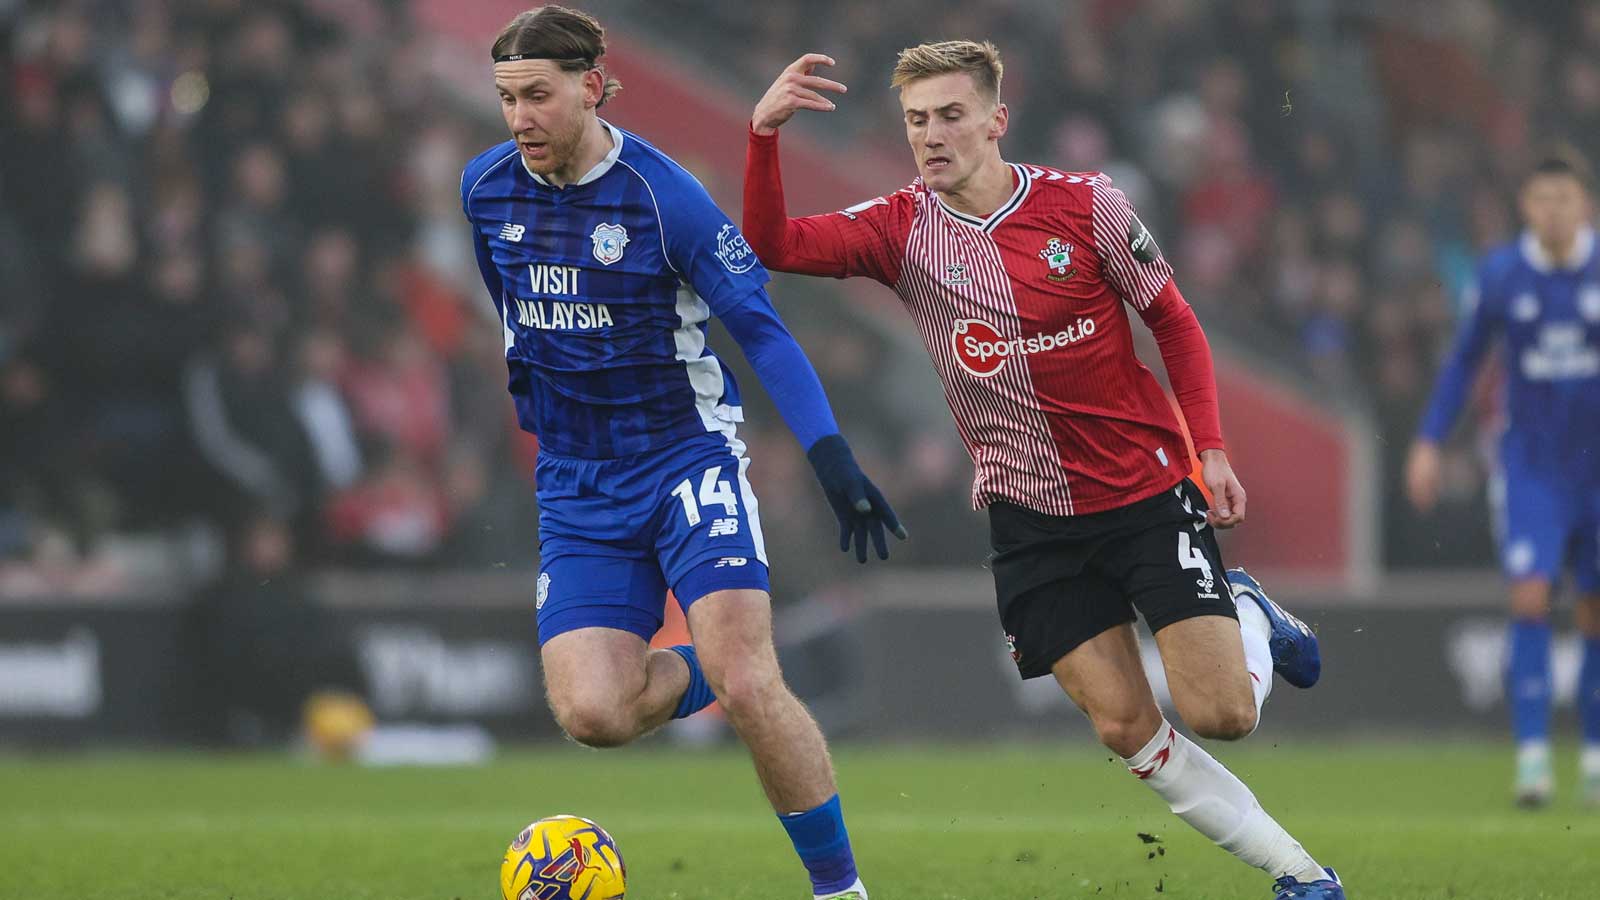 Flynn Downes in action for Southampton against Cardiff